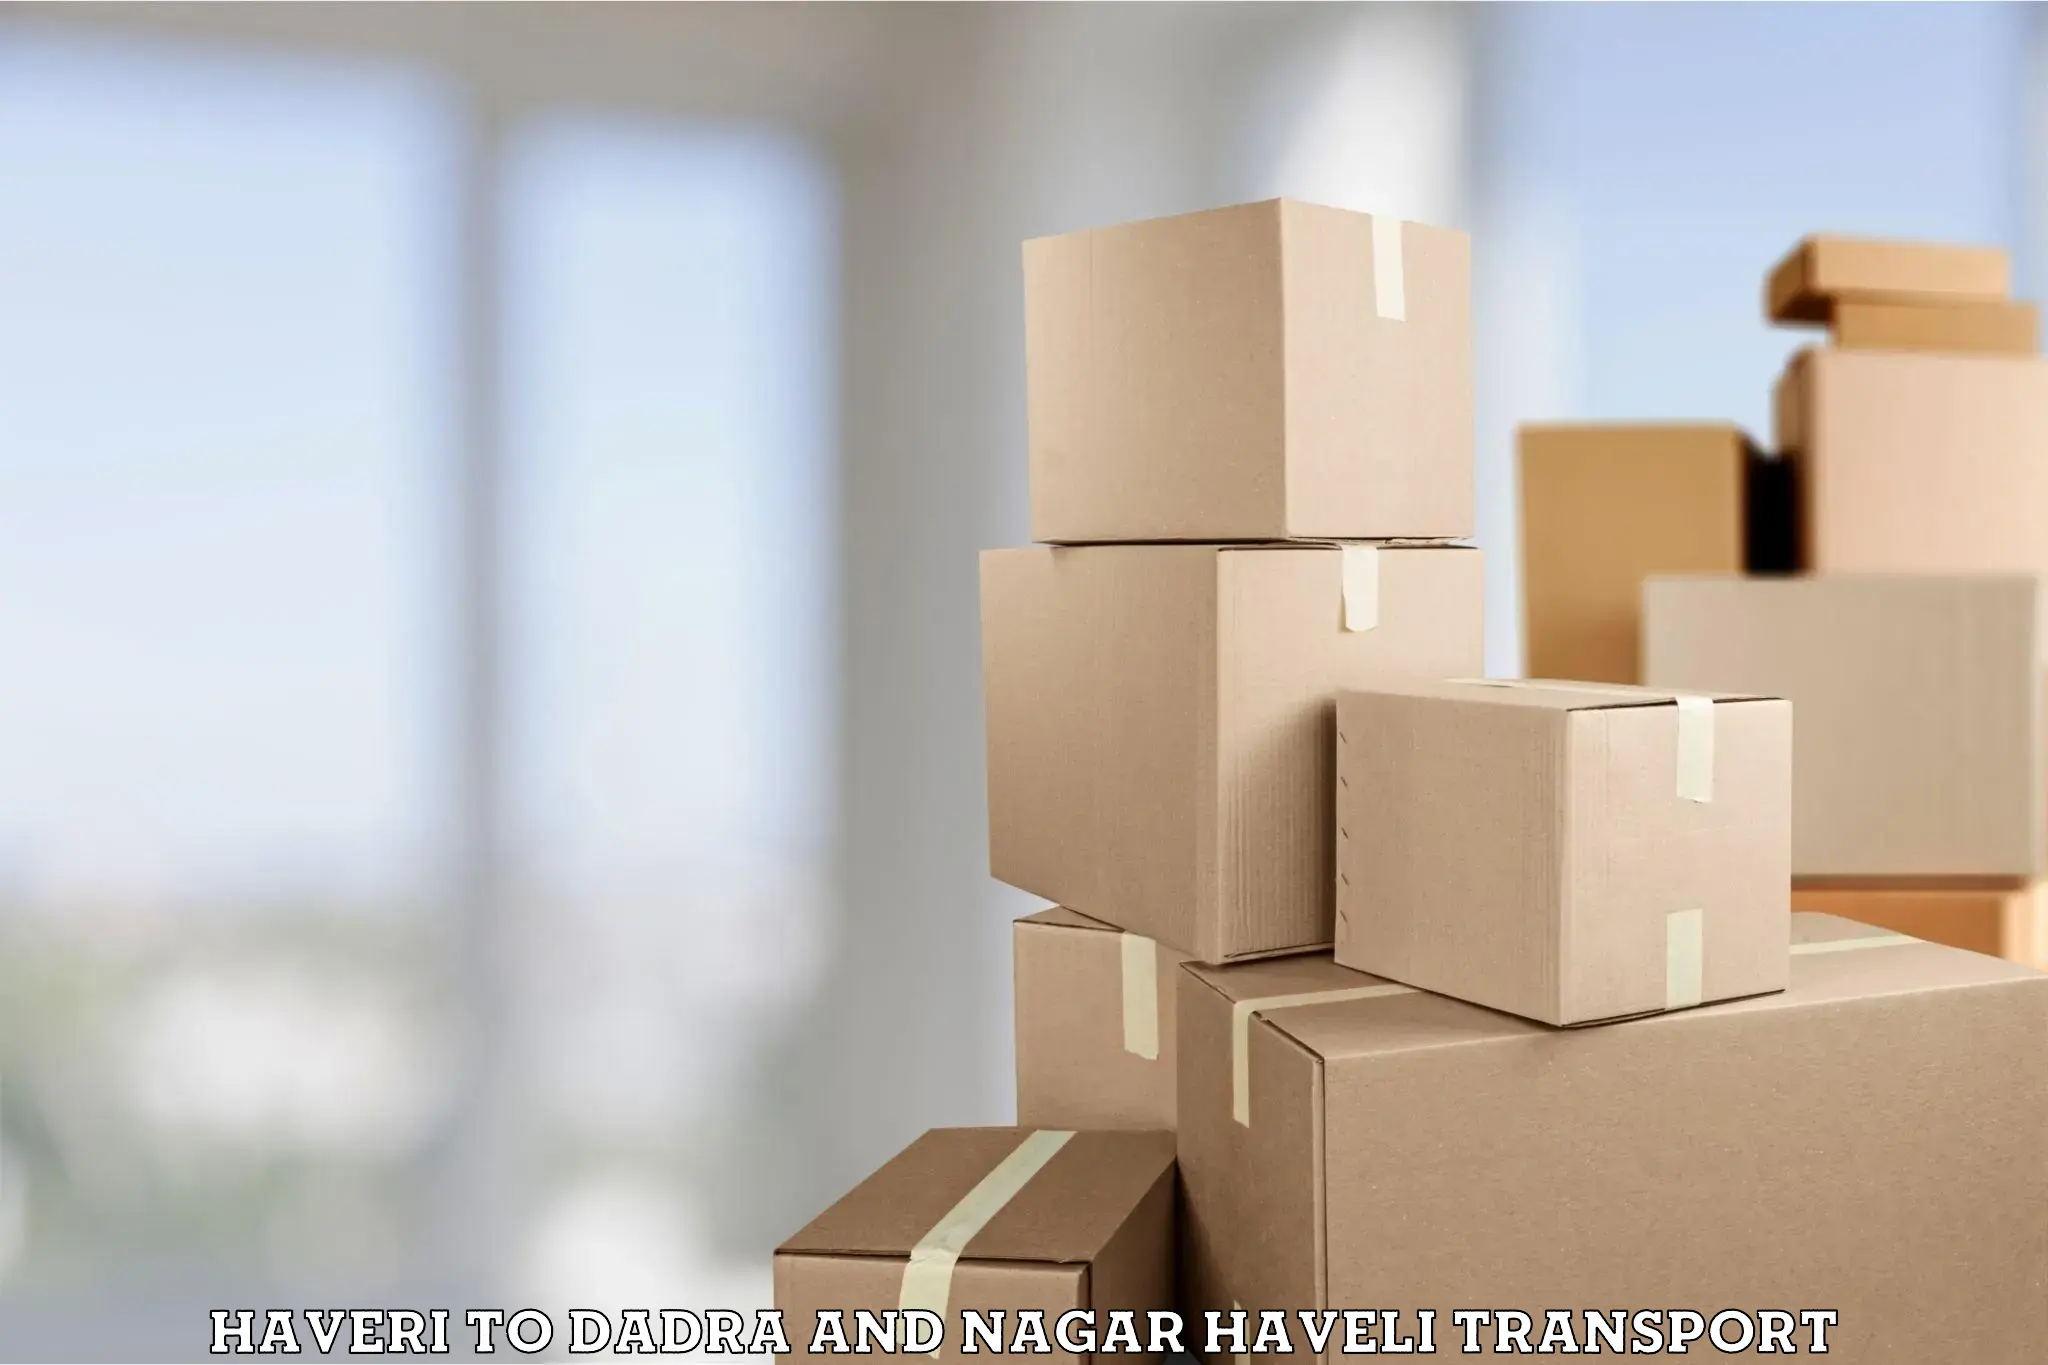 Container transportation services Haveri to Dadra and Nagar Haveli